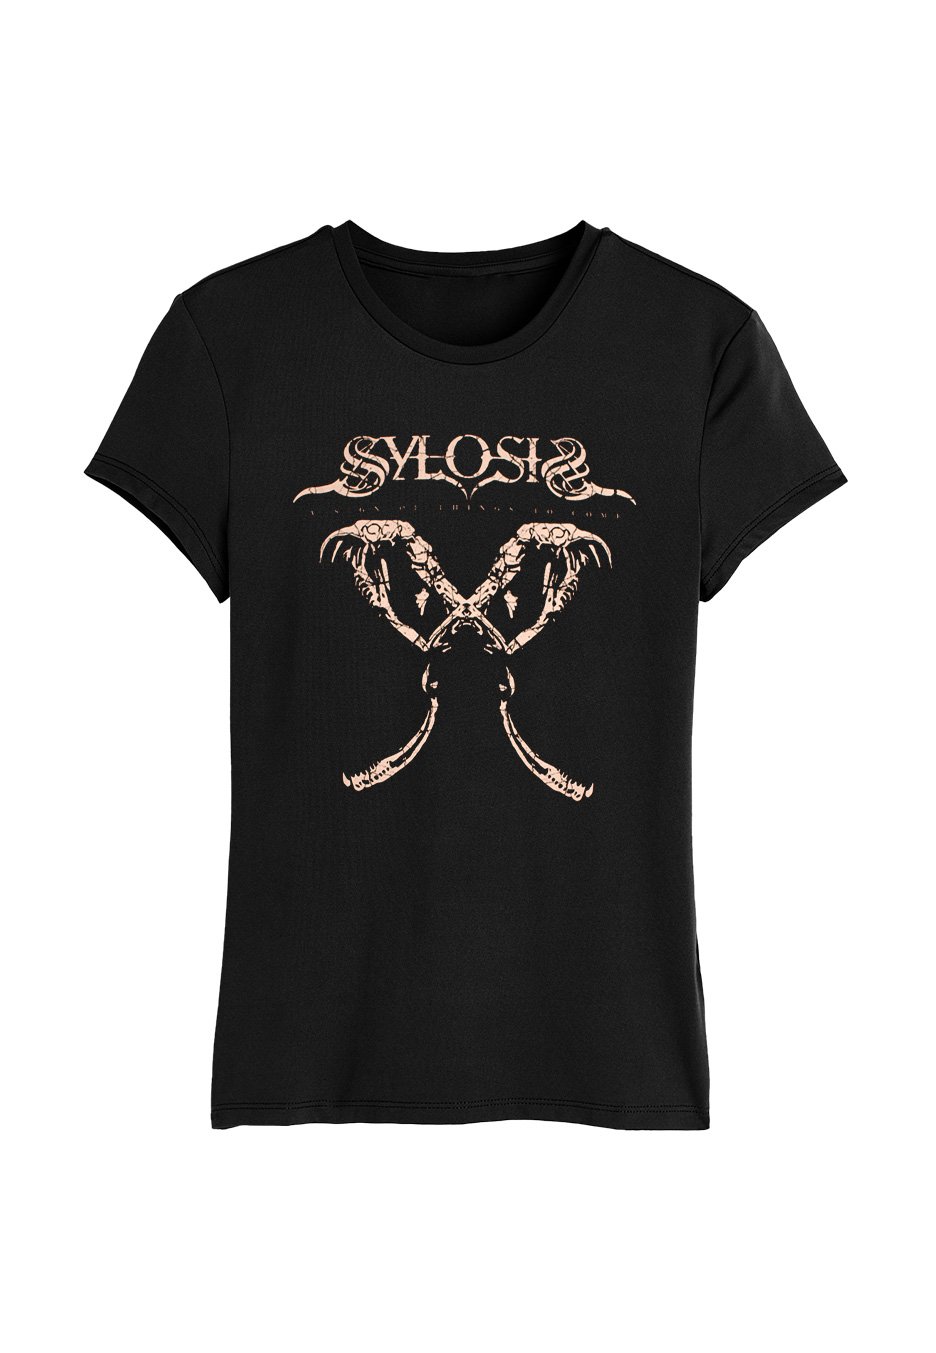 Sylosis - A Sign Of Things To Come - Girly